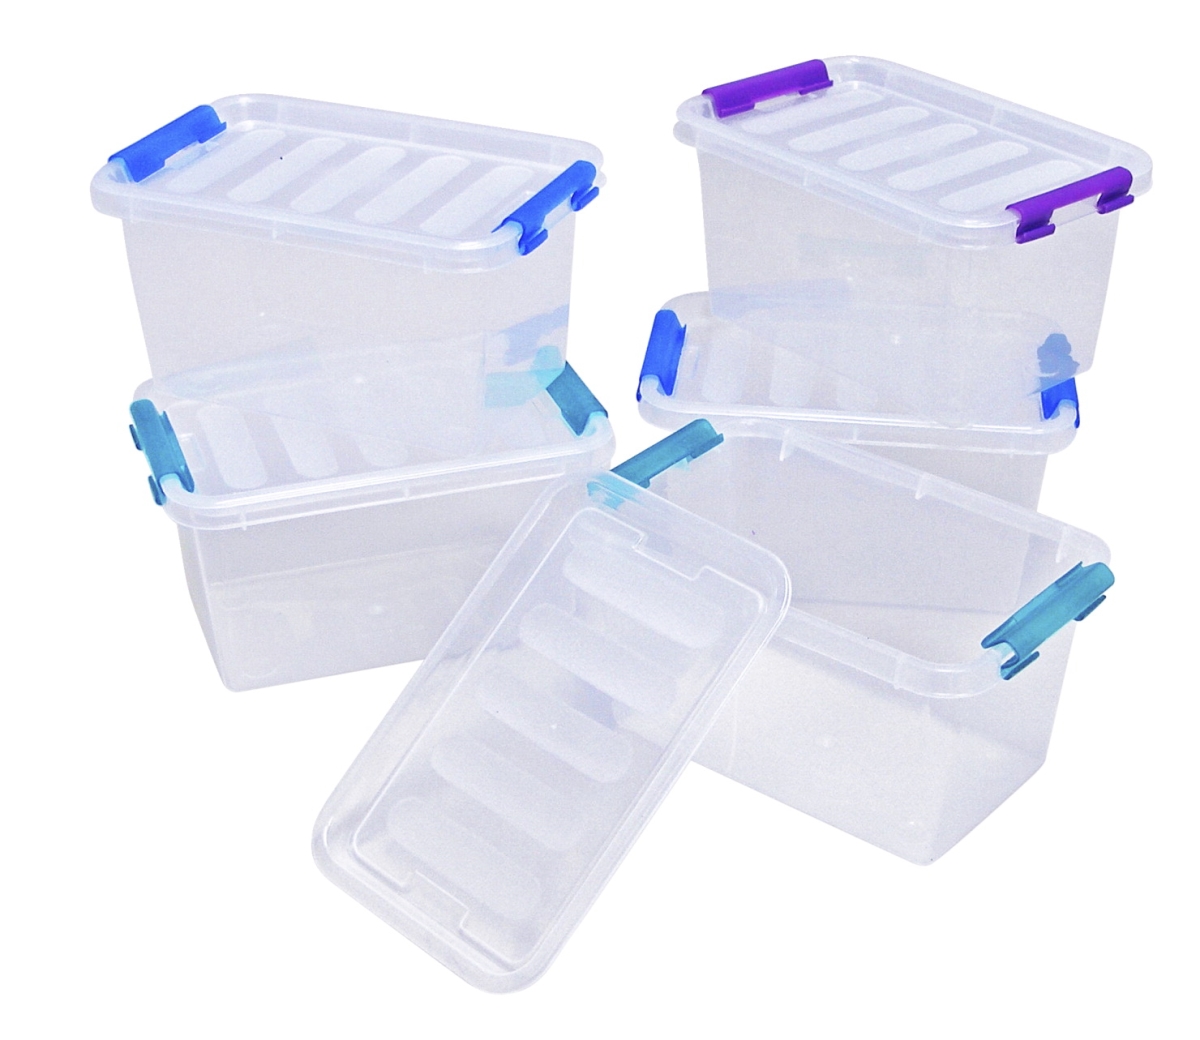 2006371 5 X 3.5 X 2.75 In. Flip Storage Box With Lid, Clear - Small - Pack Of 5